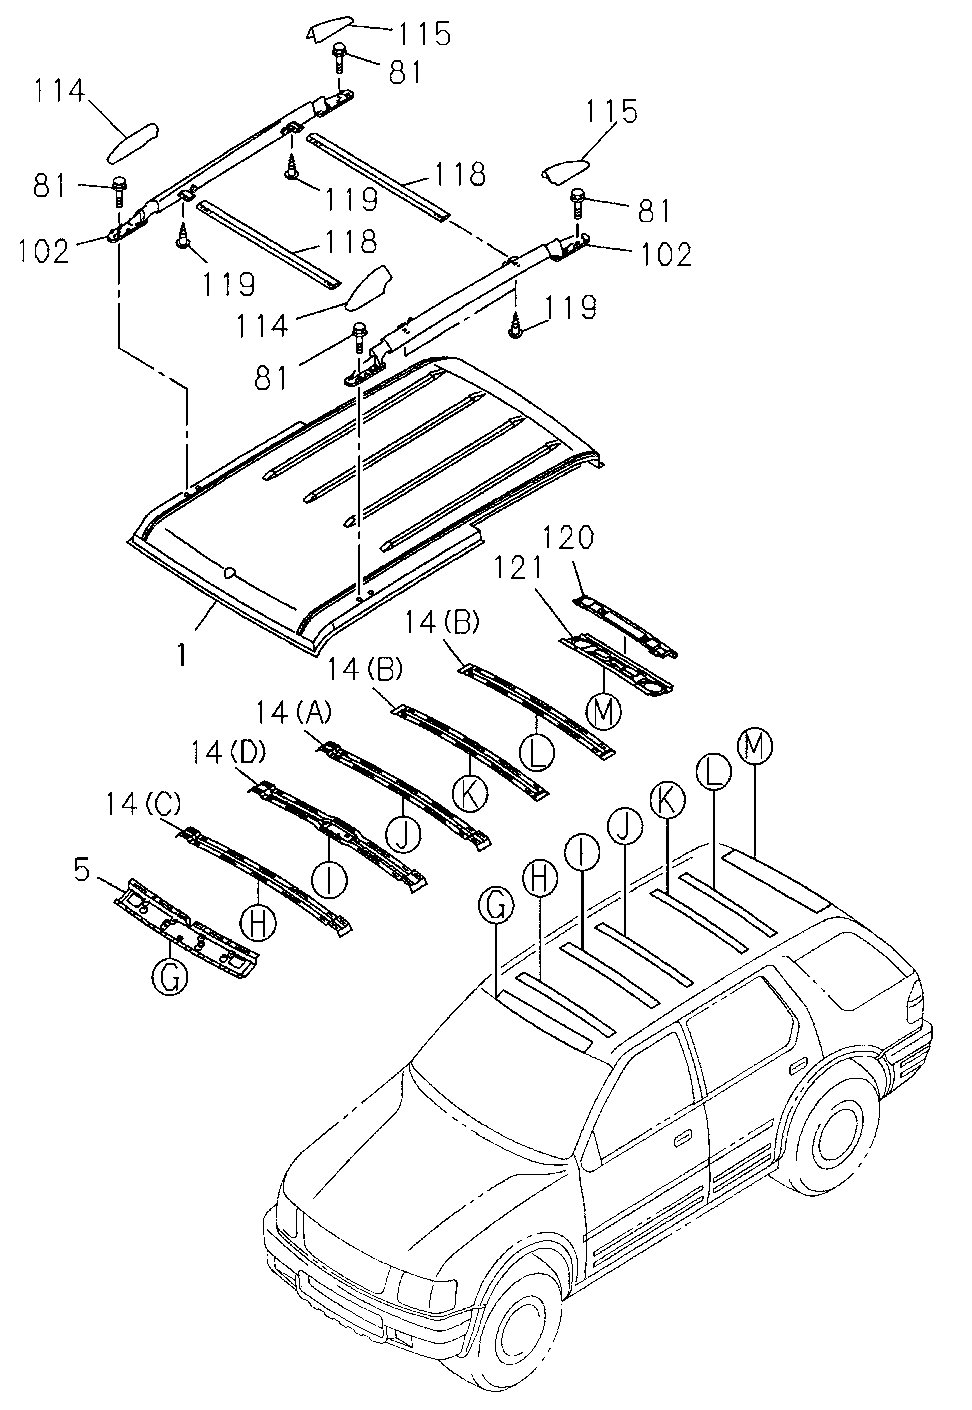 8-97124-191-2 - SUPPORT, ROOF